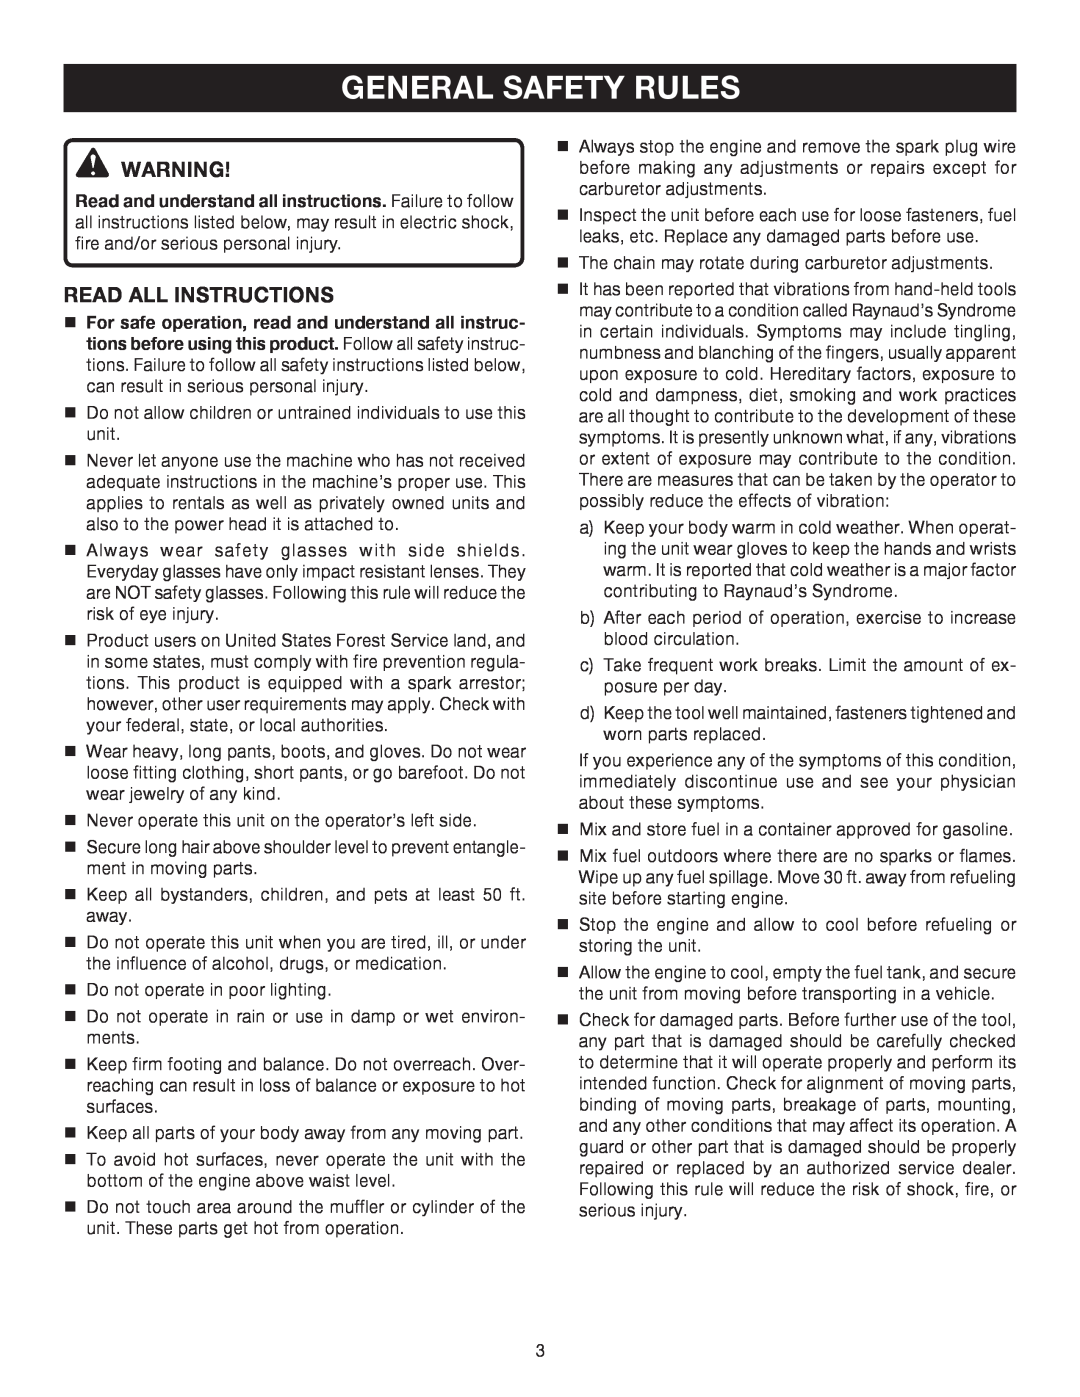 Ryobi RY52003 manual General Safety Rules, Read All Instructions 